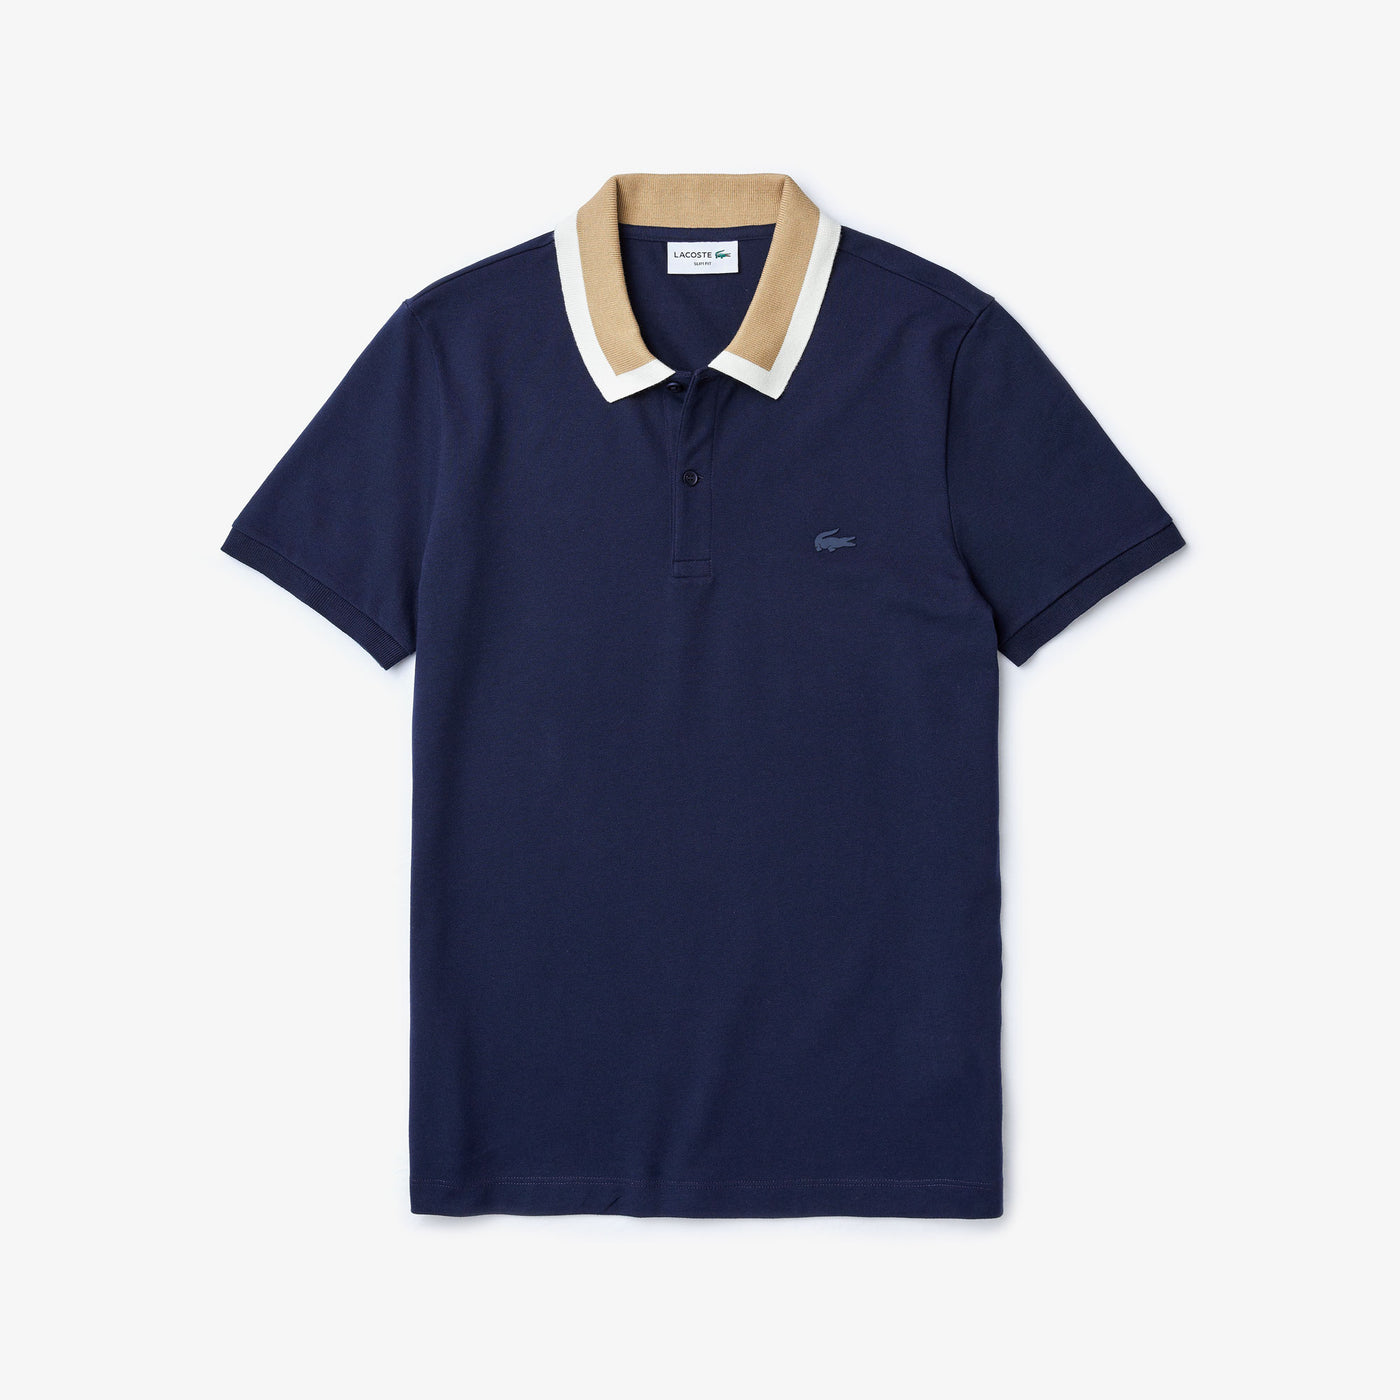 Shop The Latest Collection Of Outlet - Lacoste Lacoste Mens Slim Fit Polo - Personalizable-Ph5100 In Lebanon